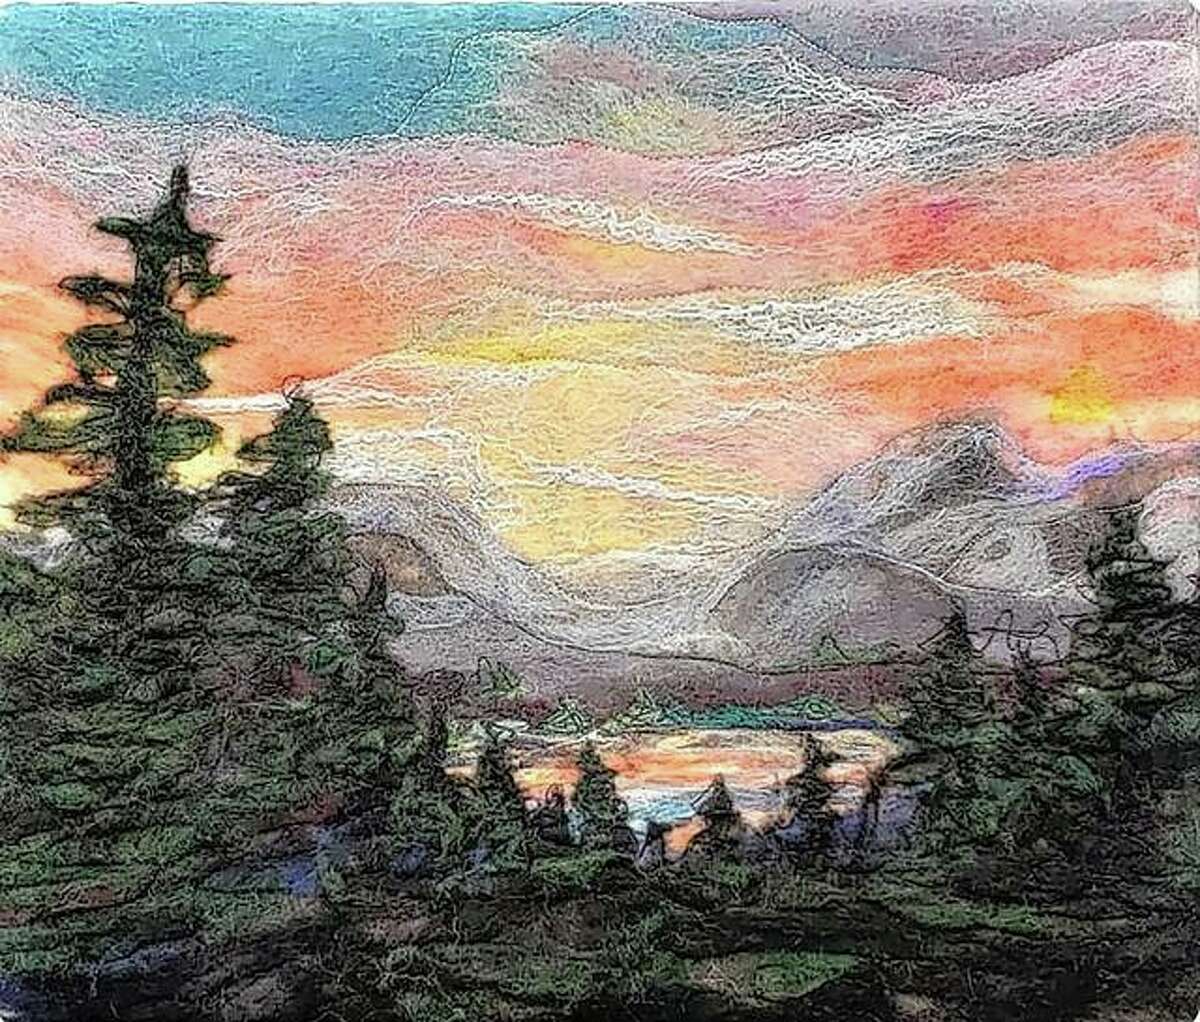 A piece of wool art by fiber artist Anna Repke features a sunset scene, one of her favorite themes.